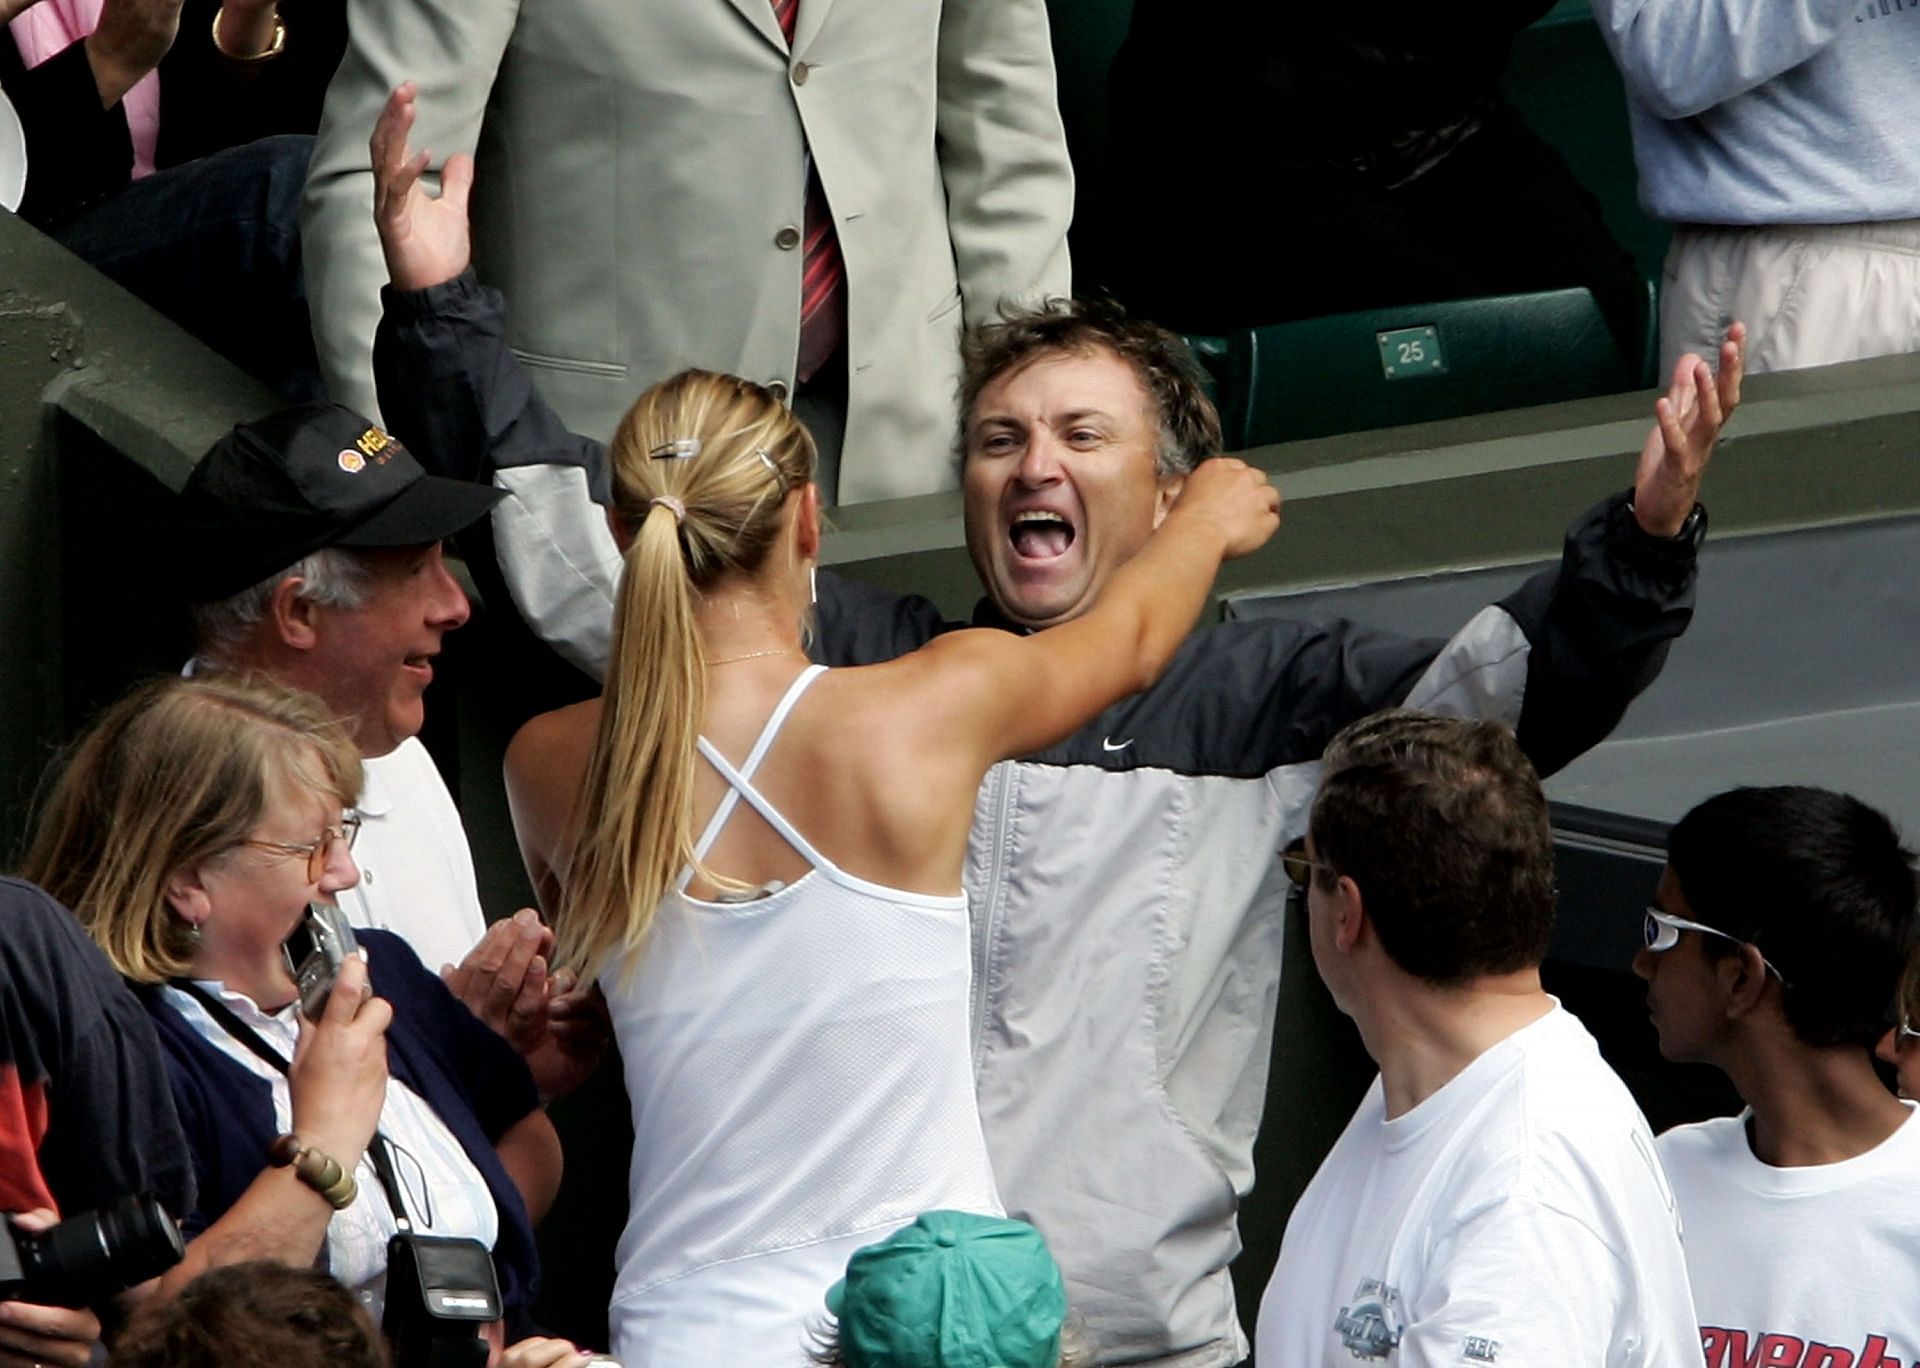 Maria Sharapova and her father celebrating after she won Wimbledon in 2004